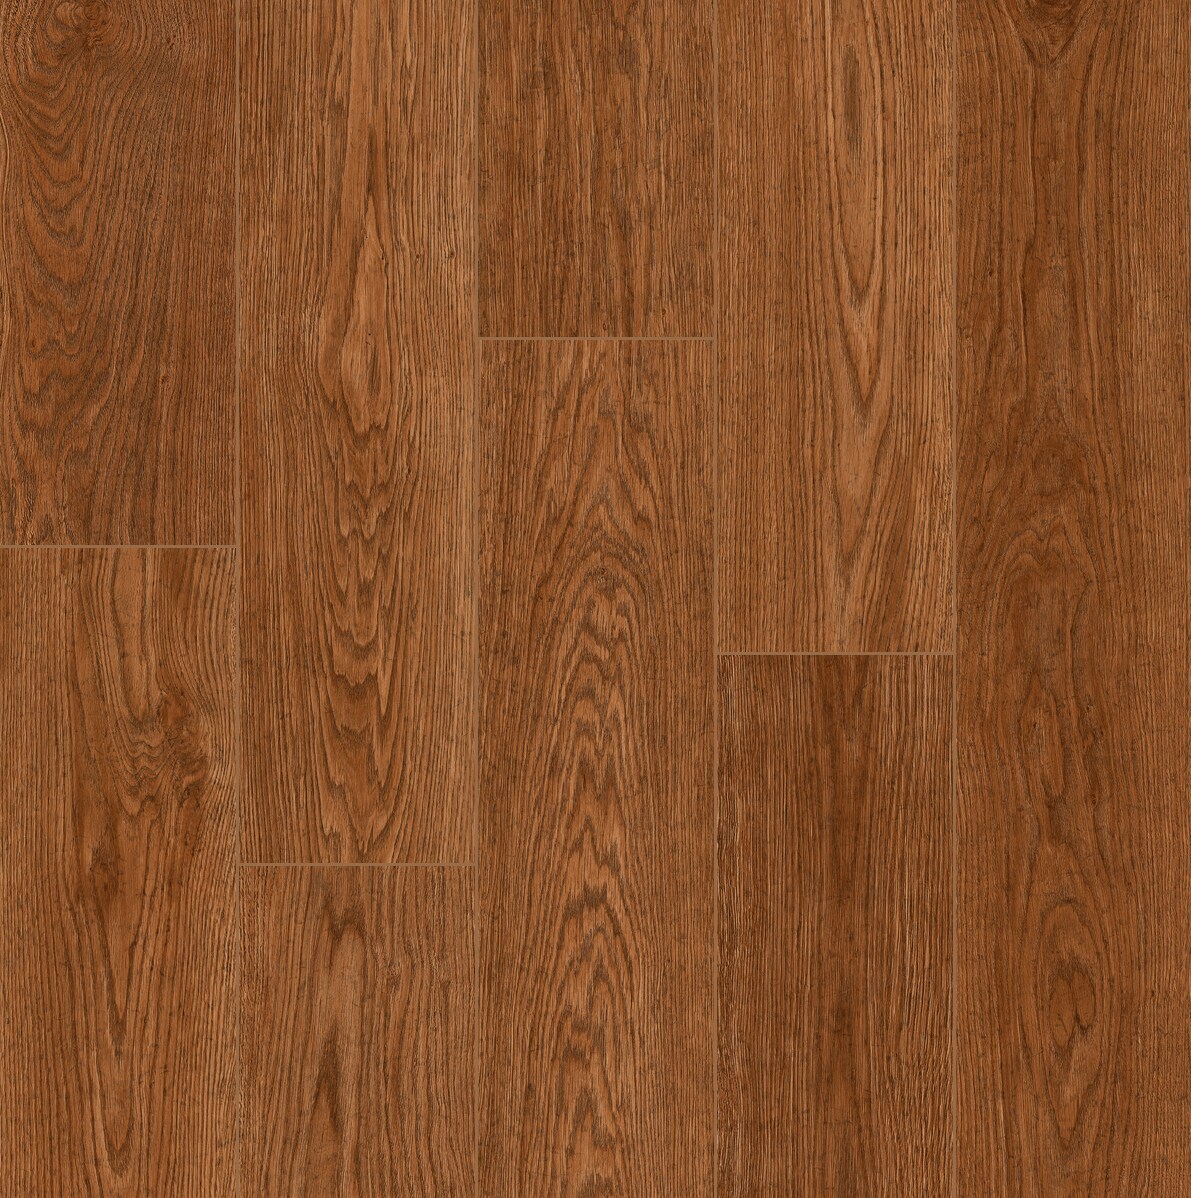 Swiftlock 4 45 In W X 4 23 Ft L Ginger Oak Wood Plank Laminate Flooring In The Laminate Flooring Department At Lowes Com